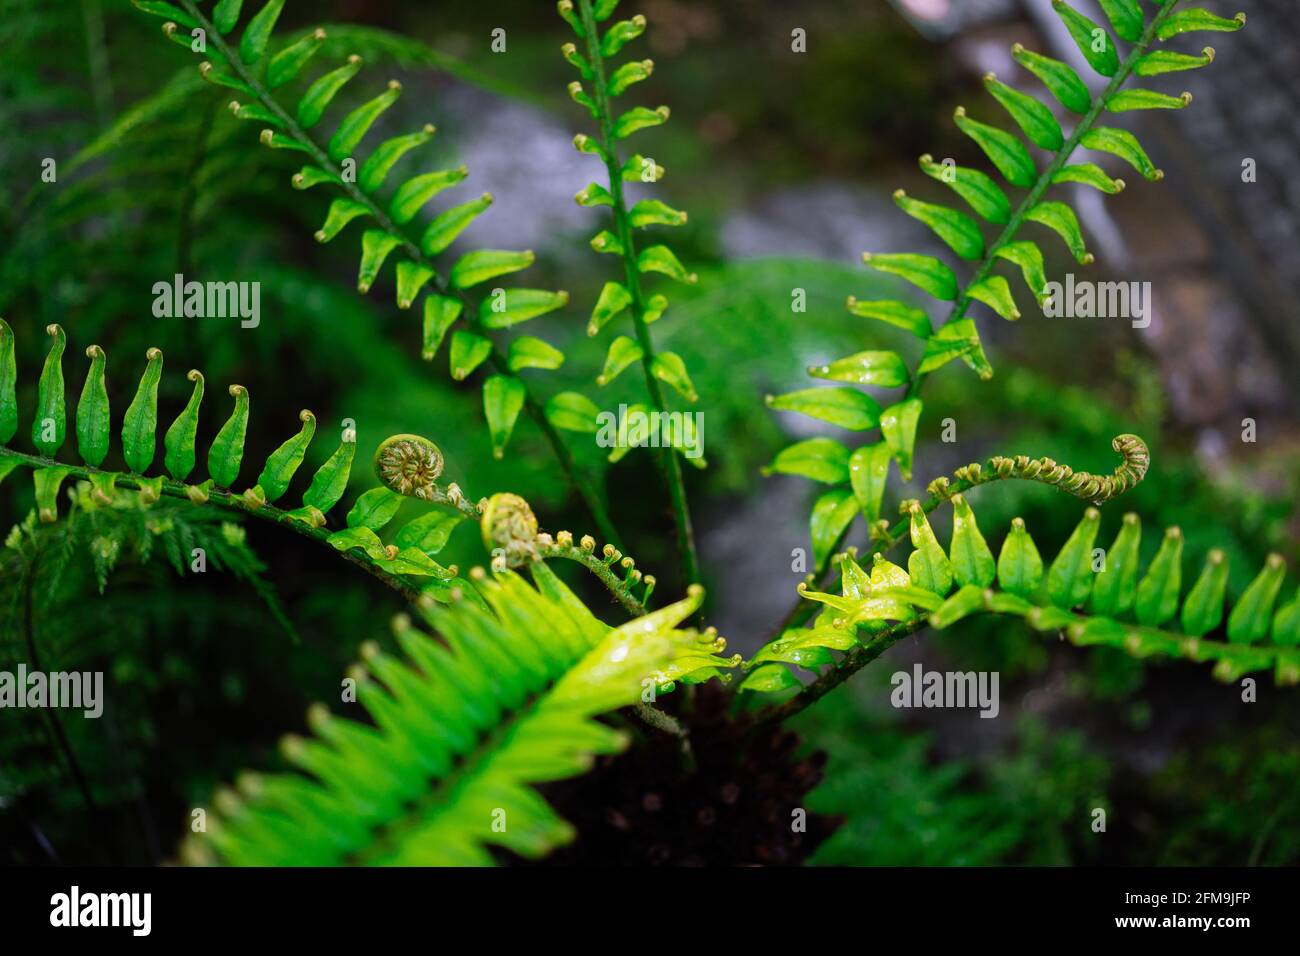 Fern fiddlehead unfurling with selective focus in new leaf. Stock Photo